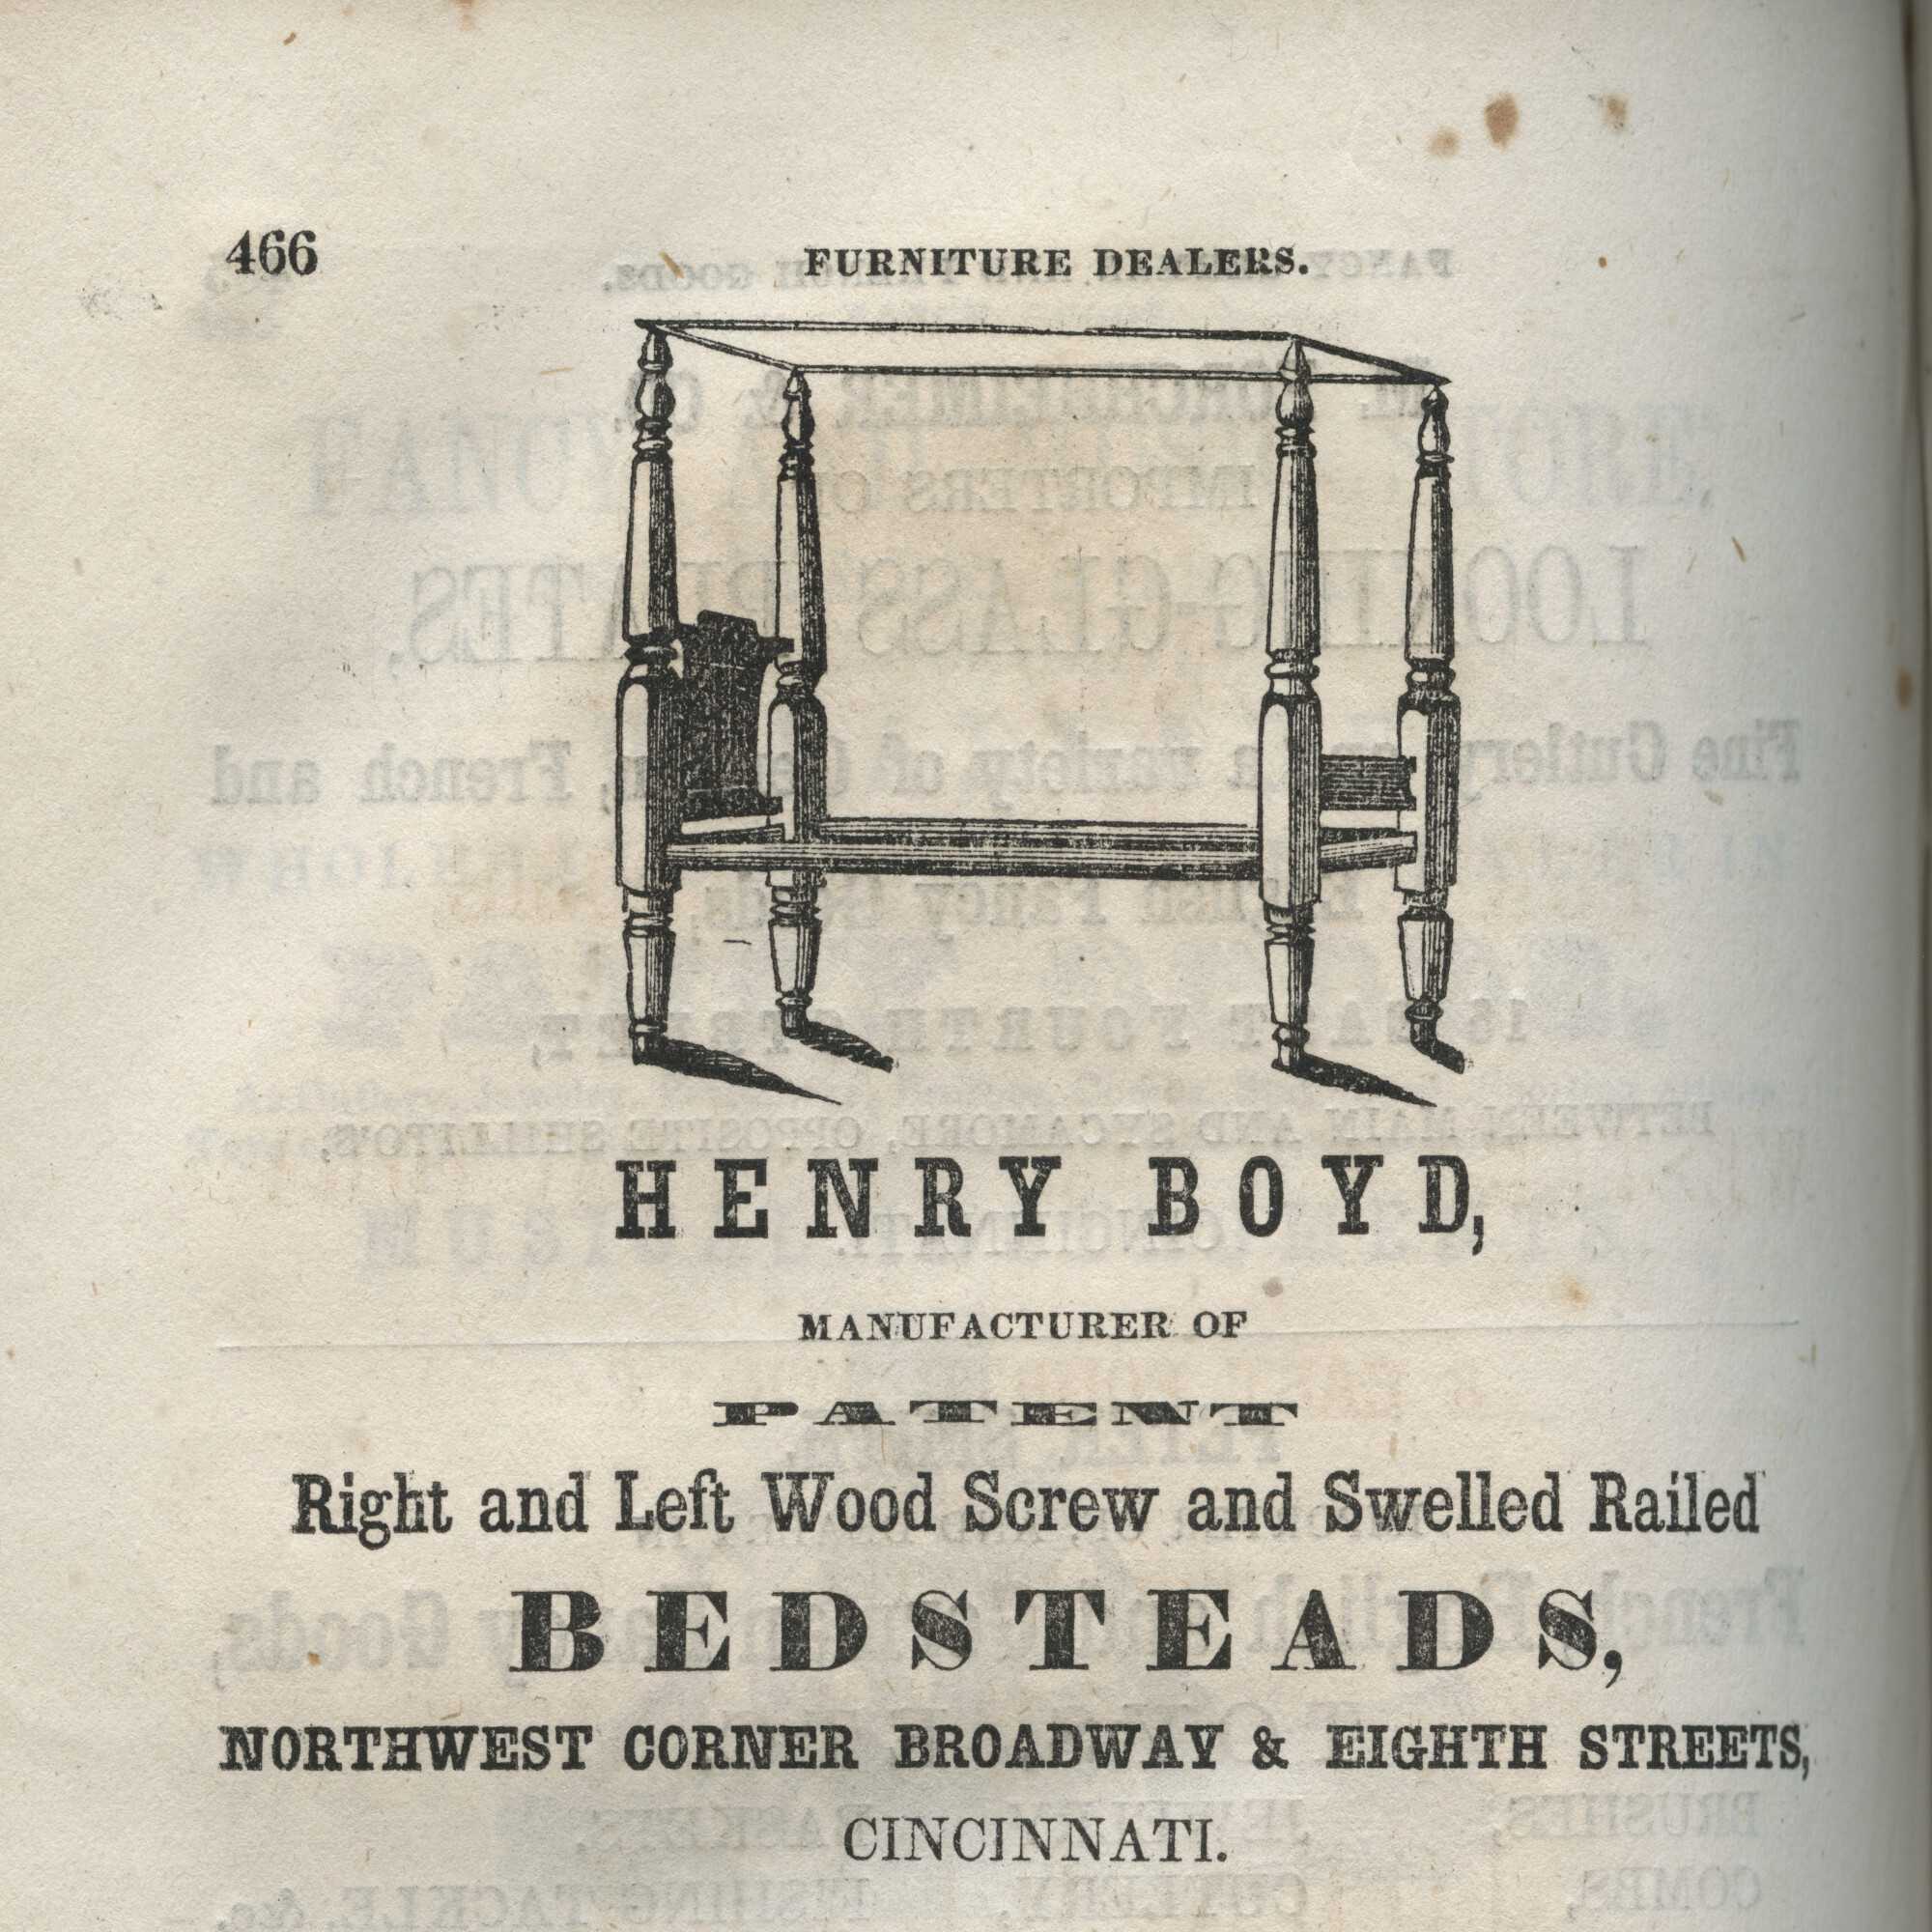 Image of an advertisement for Henry Boyd bedsteads